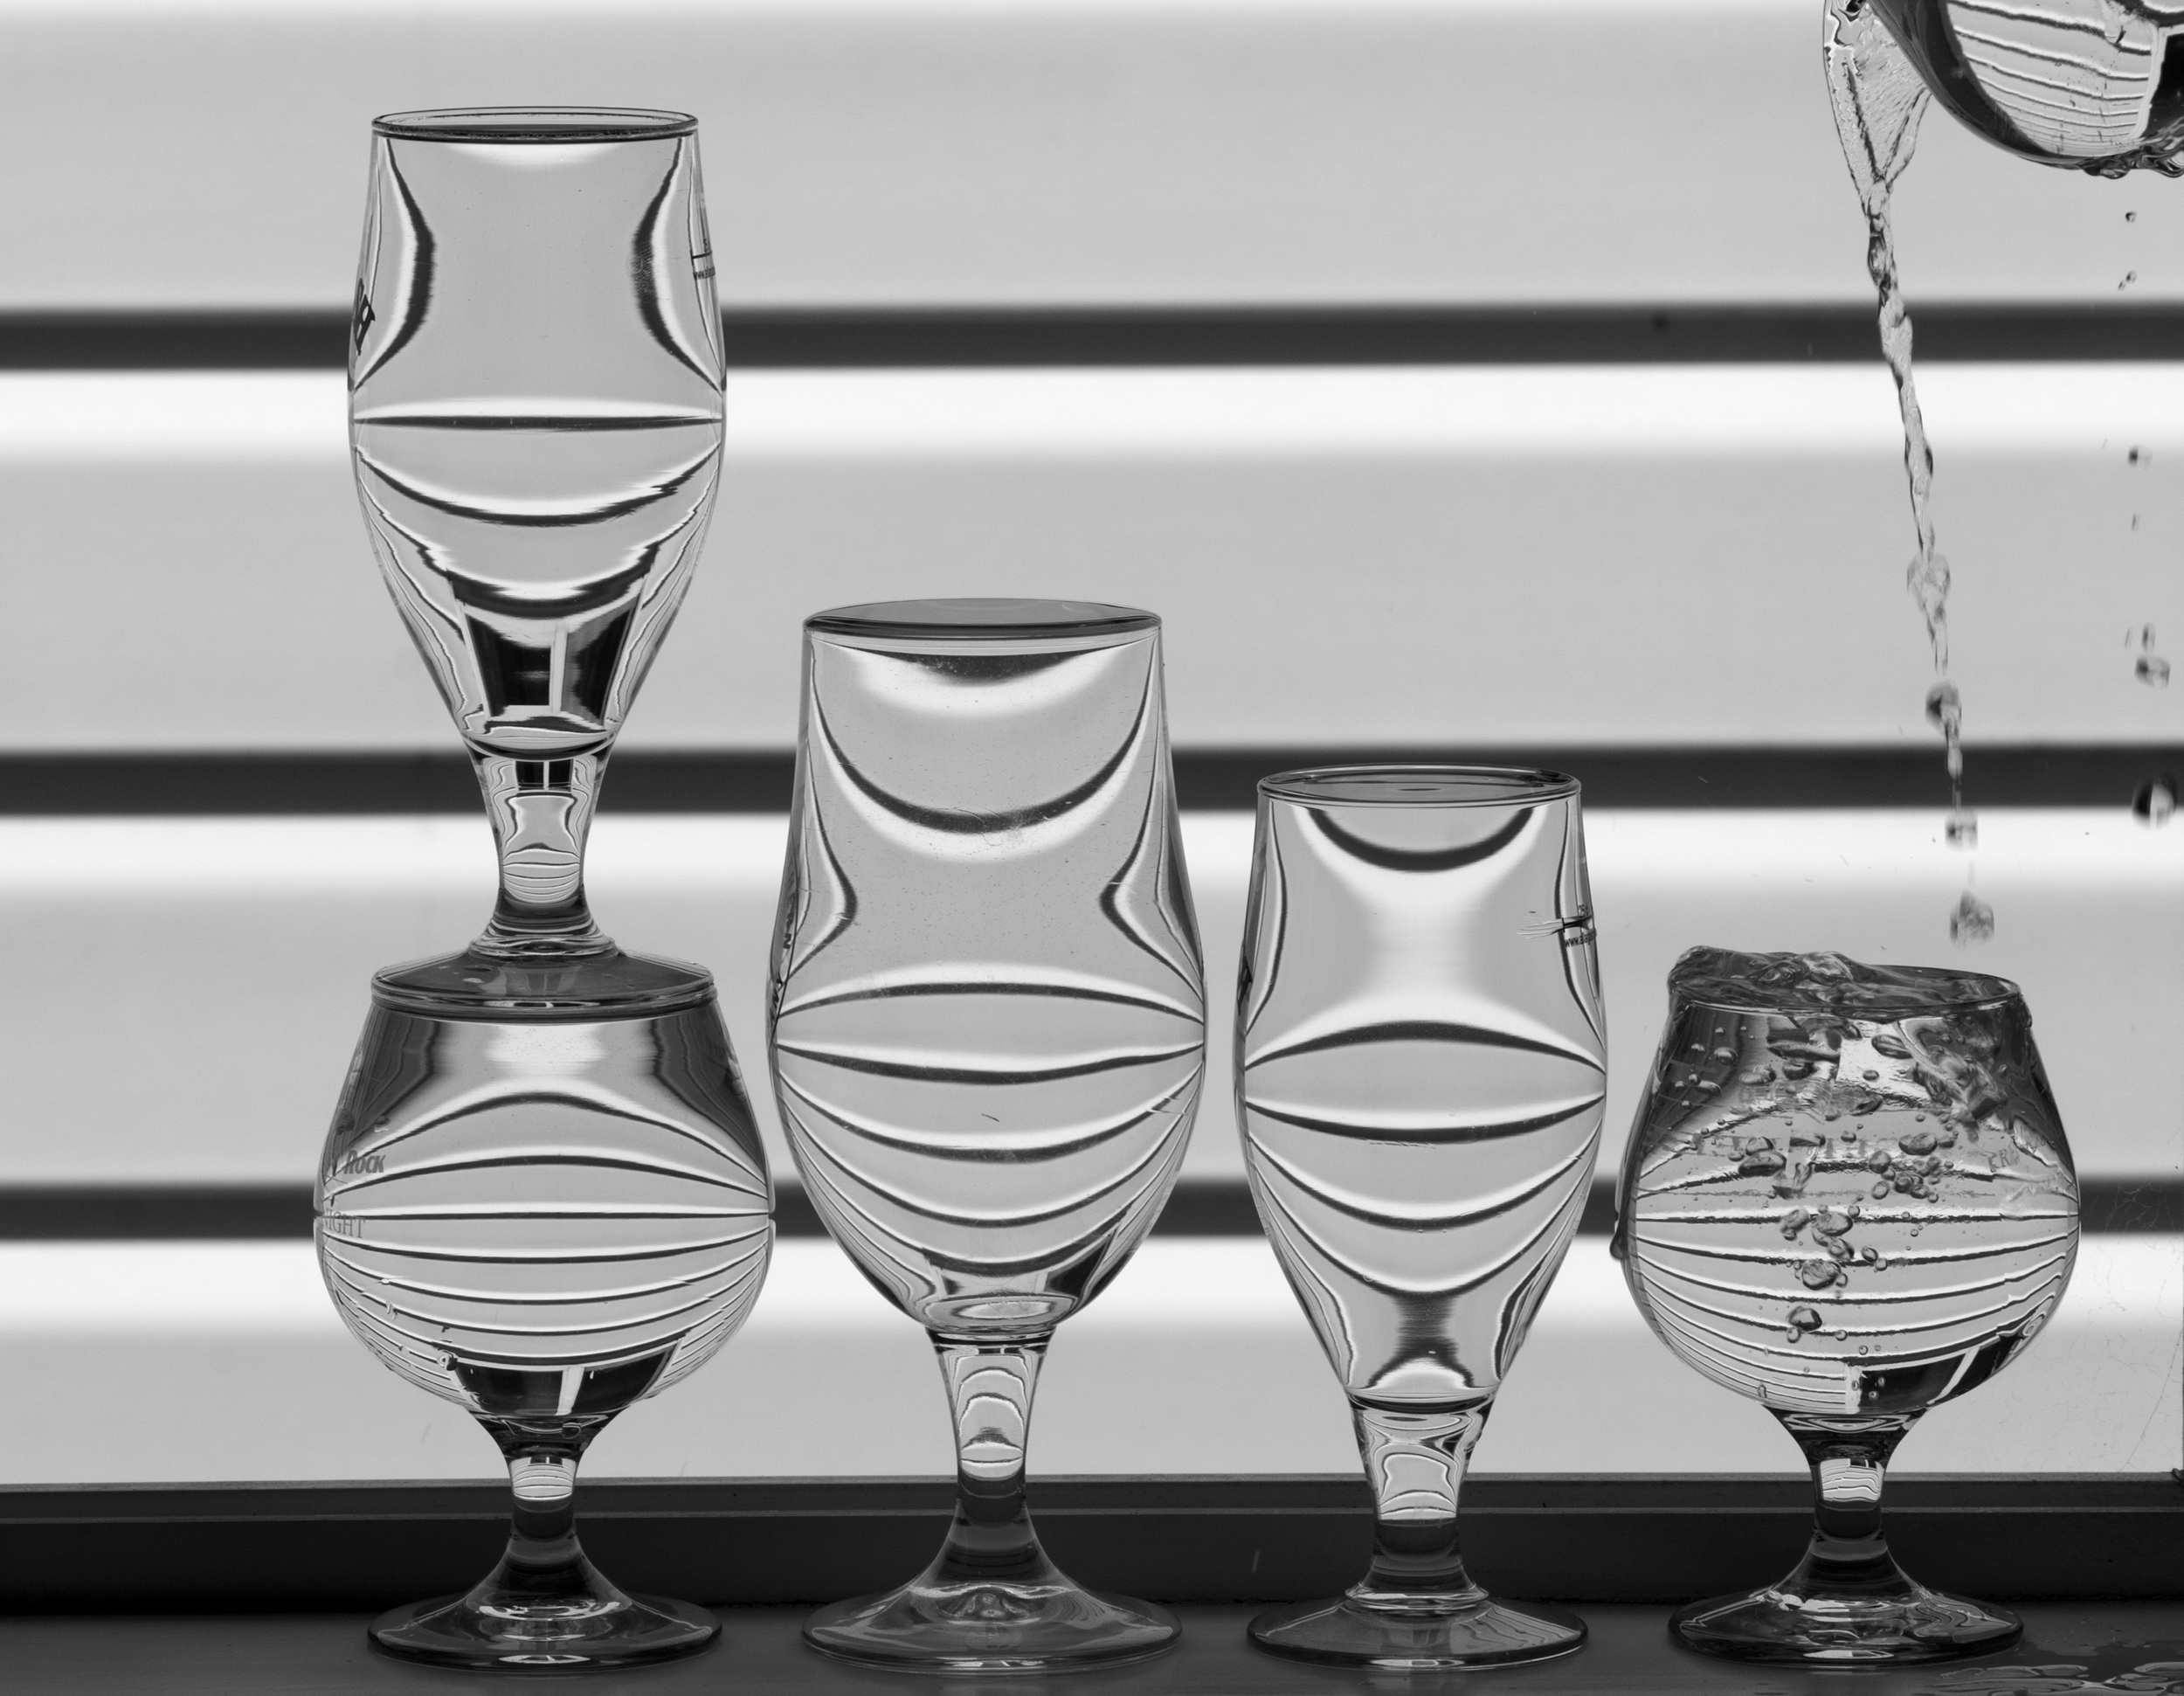  Refraction Study II, 2012 Archival pigment print 14 x 18 inches 